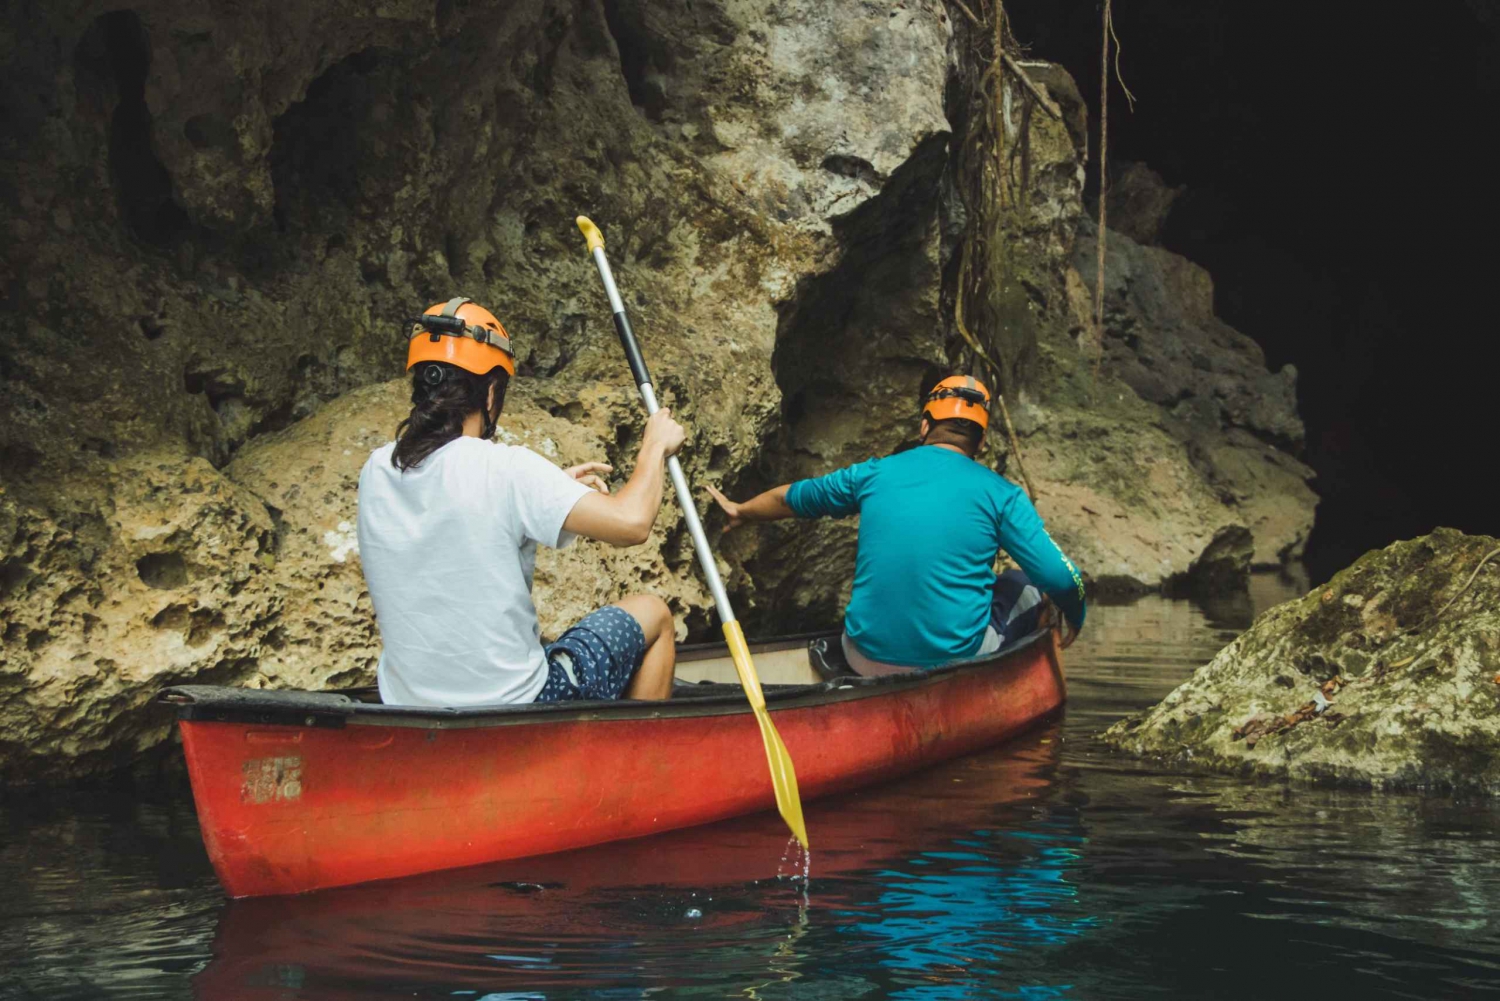 Indulge-in-a-Canoeing-Adventure-Along-Tranquil-Rivers